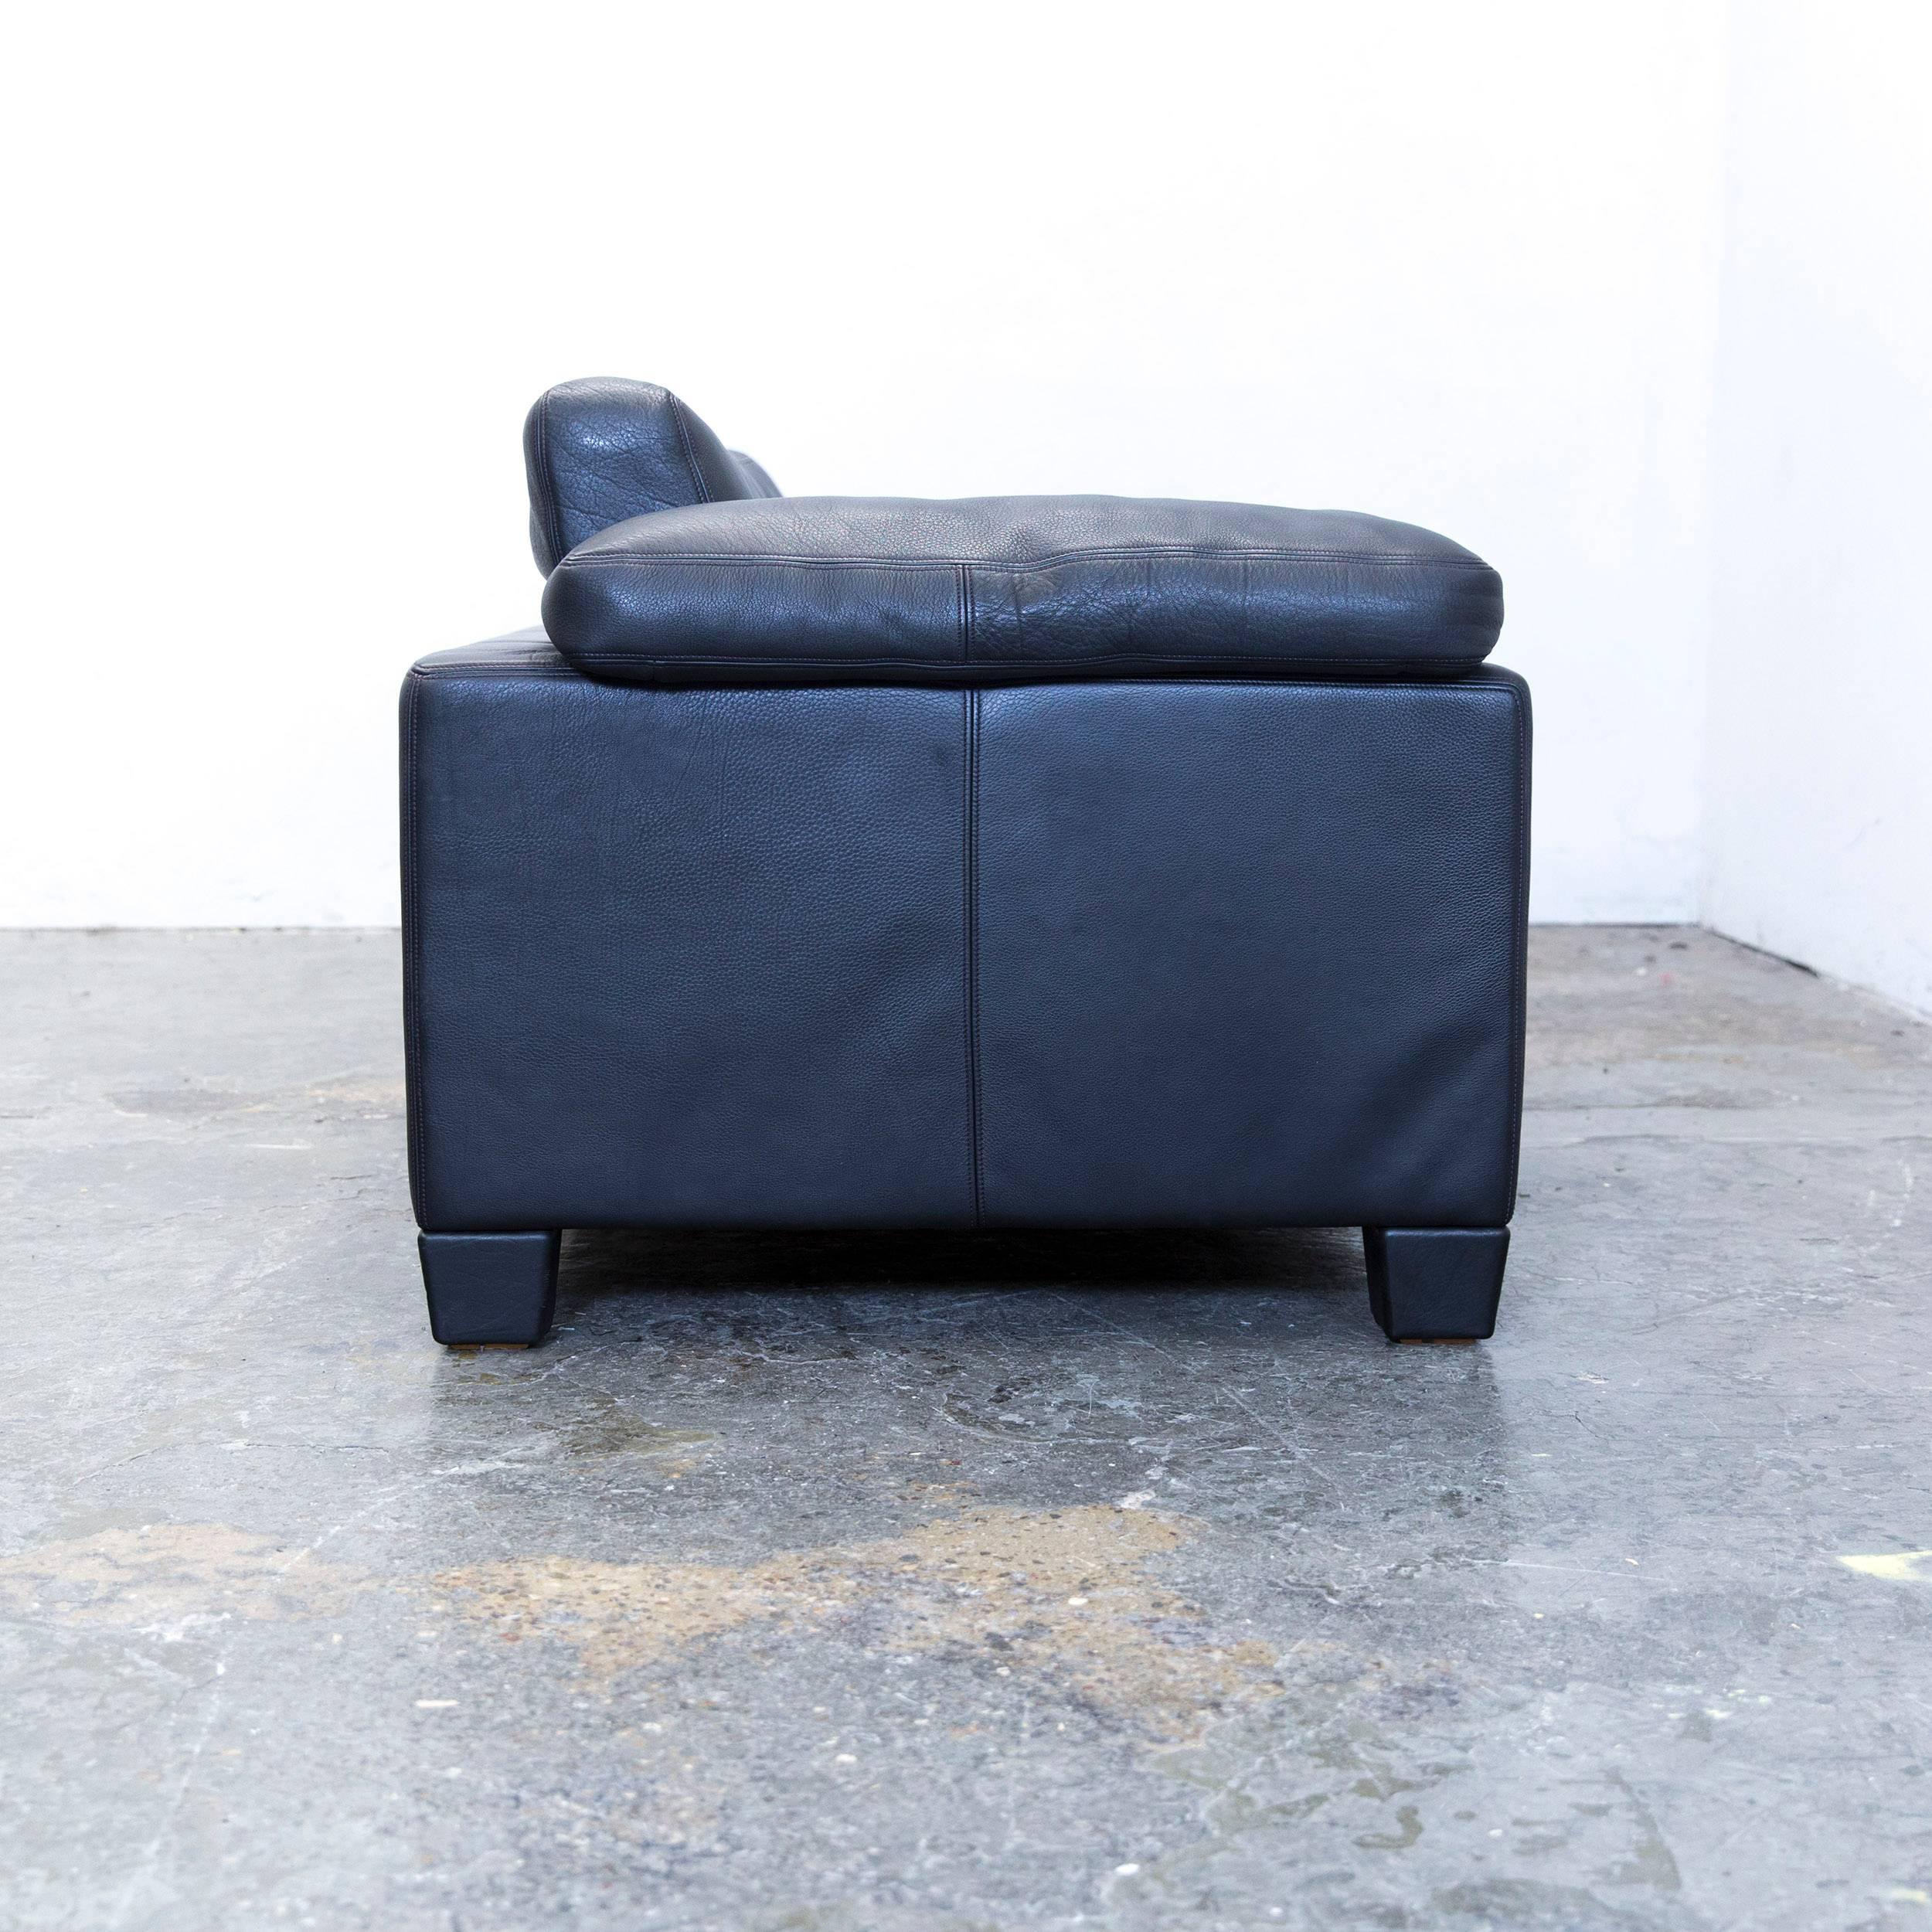 De Sede Ds 17 Designer Sofa Leather Black Two-Seat Couch Modern 5